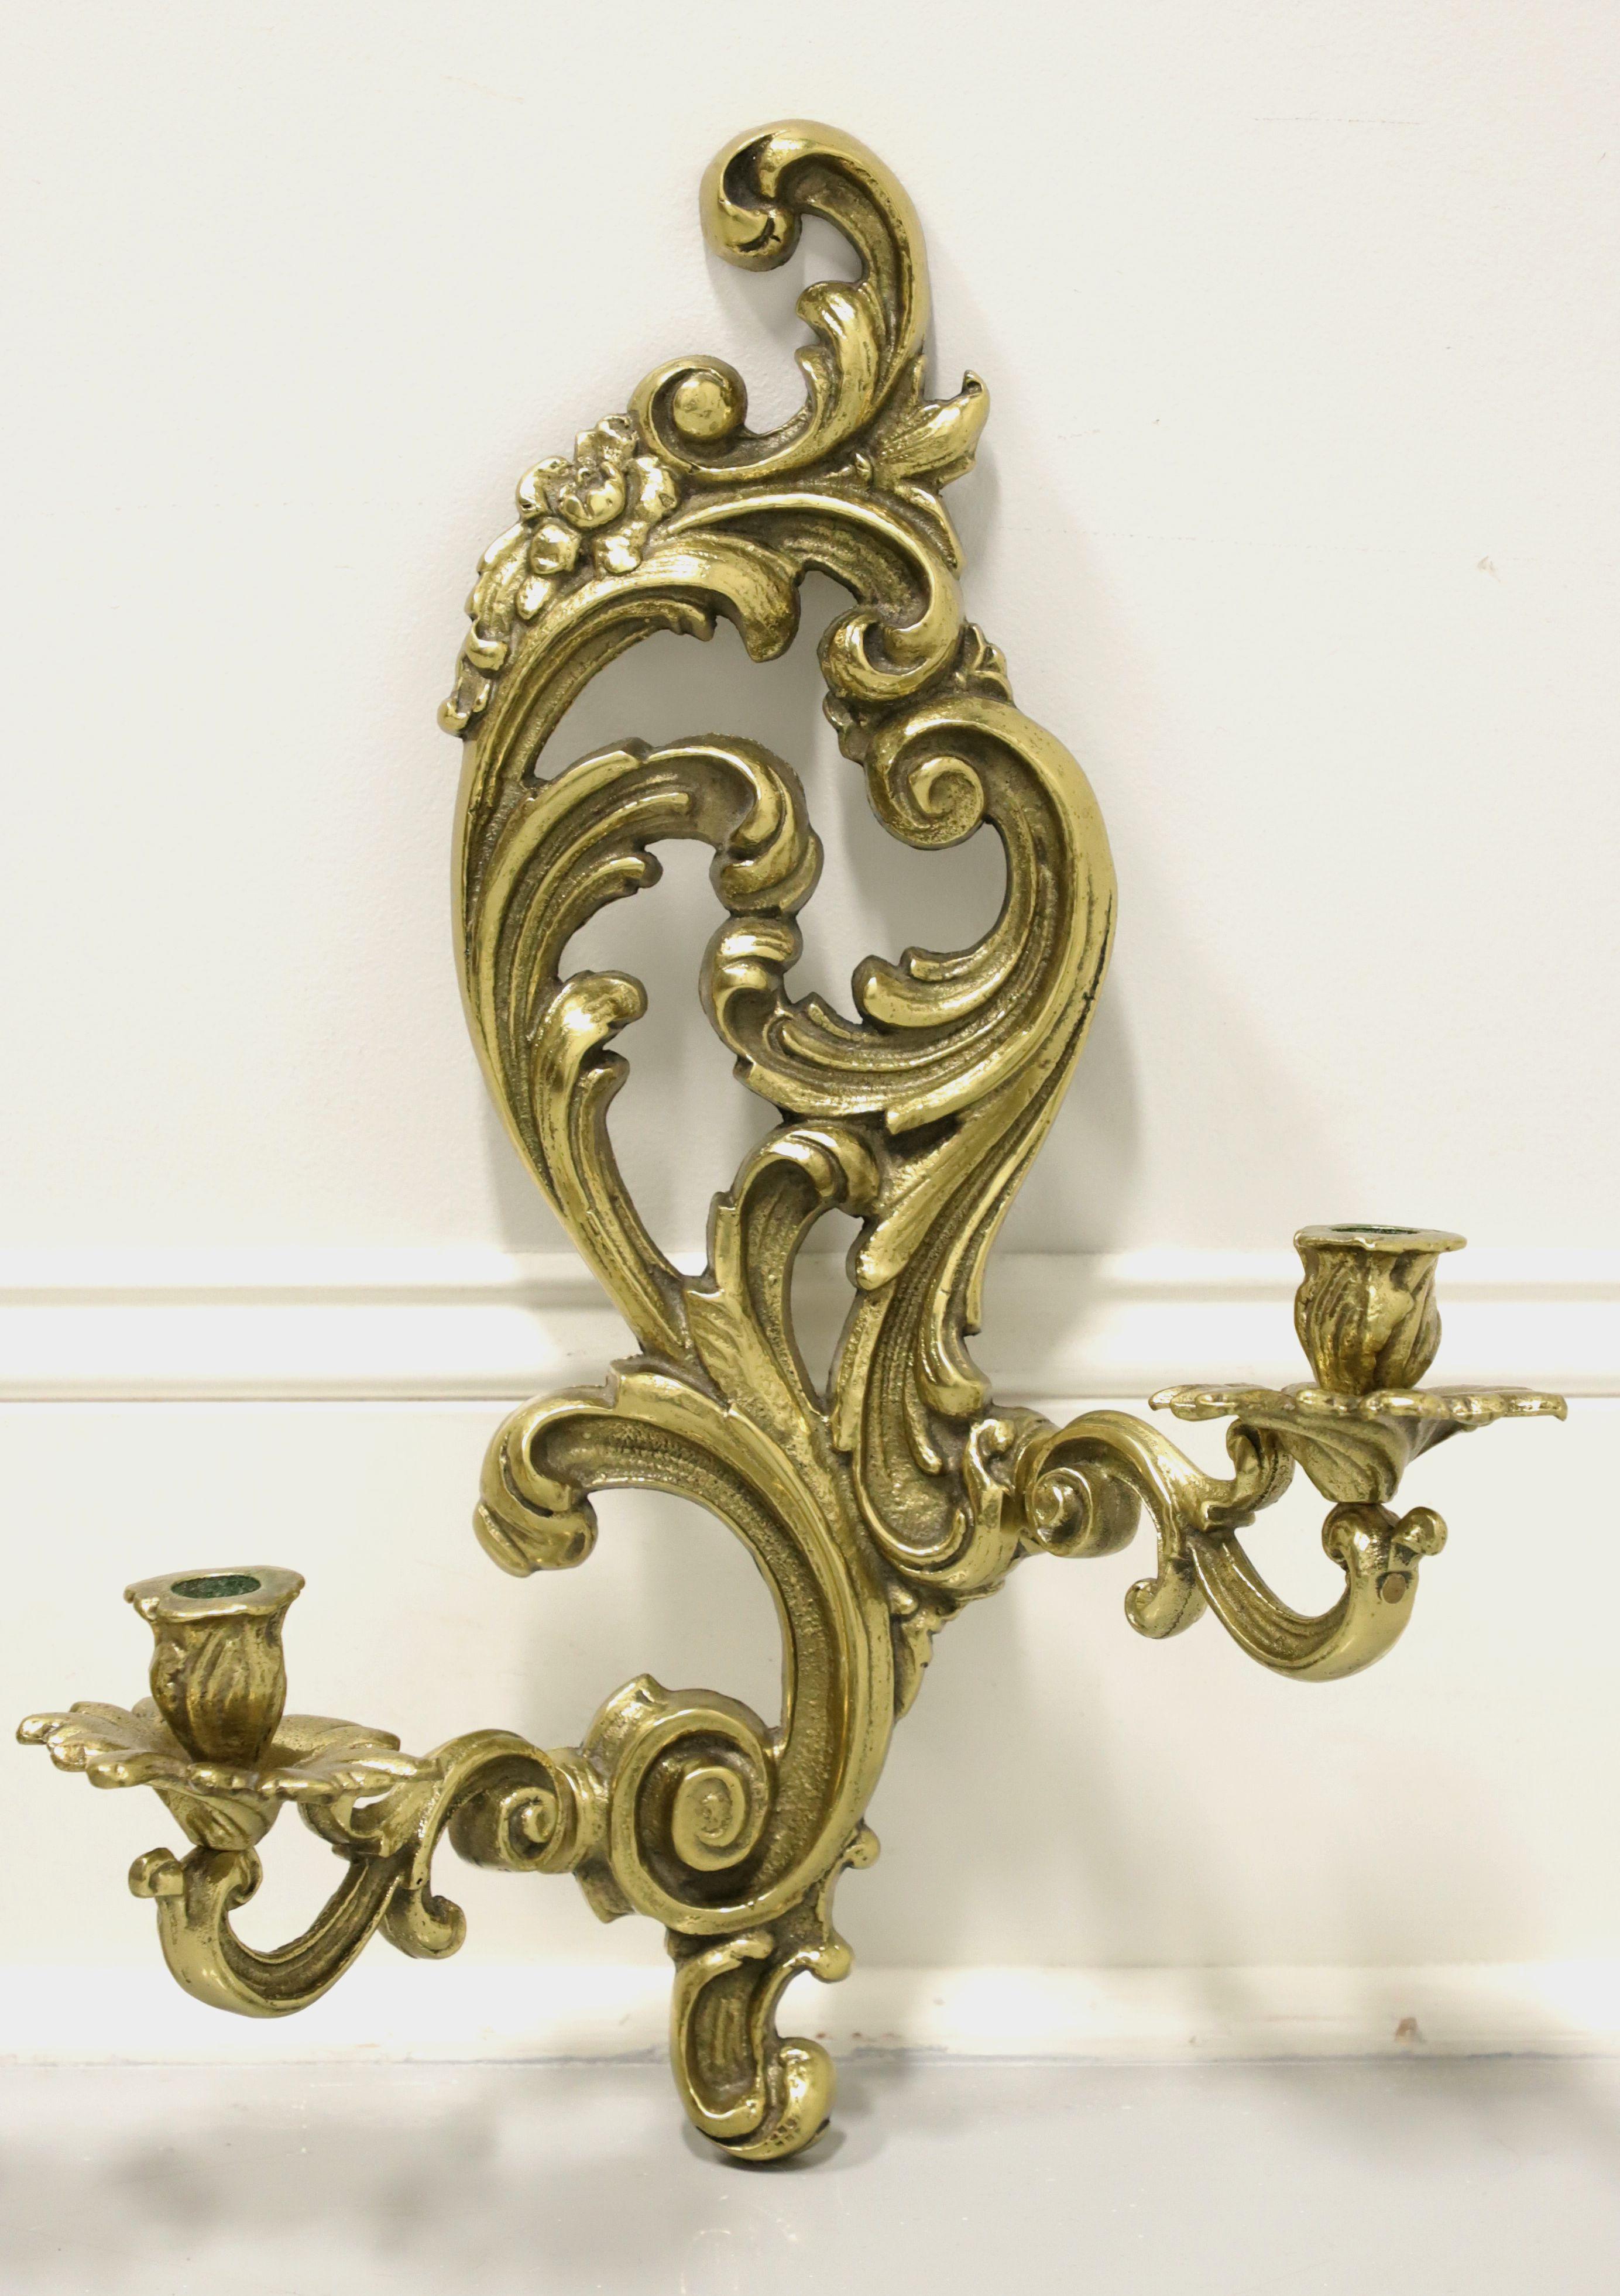 American Antique 1920's Solid Brass Rococo Style Candle Wall Sconces - Pair For Sale